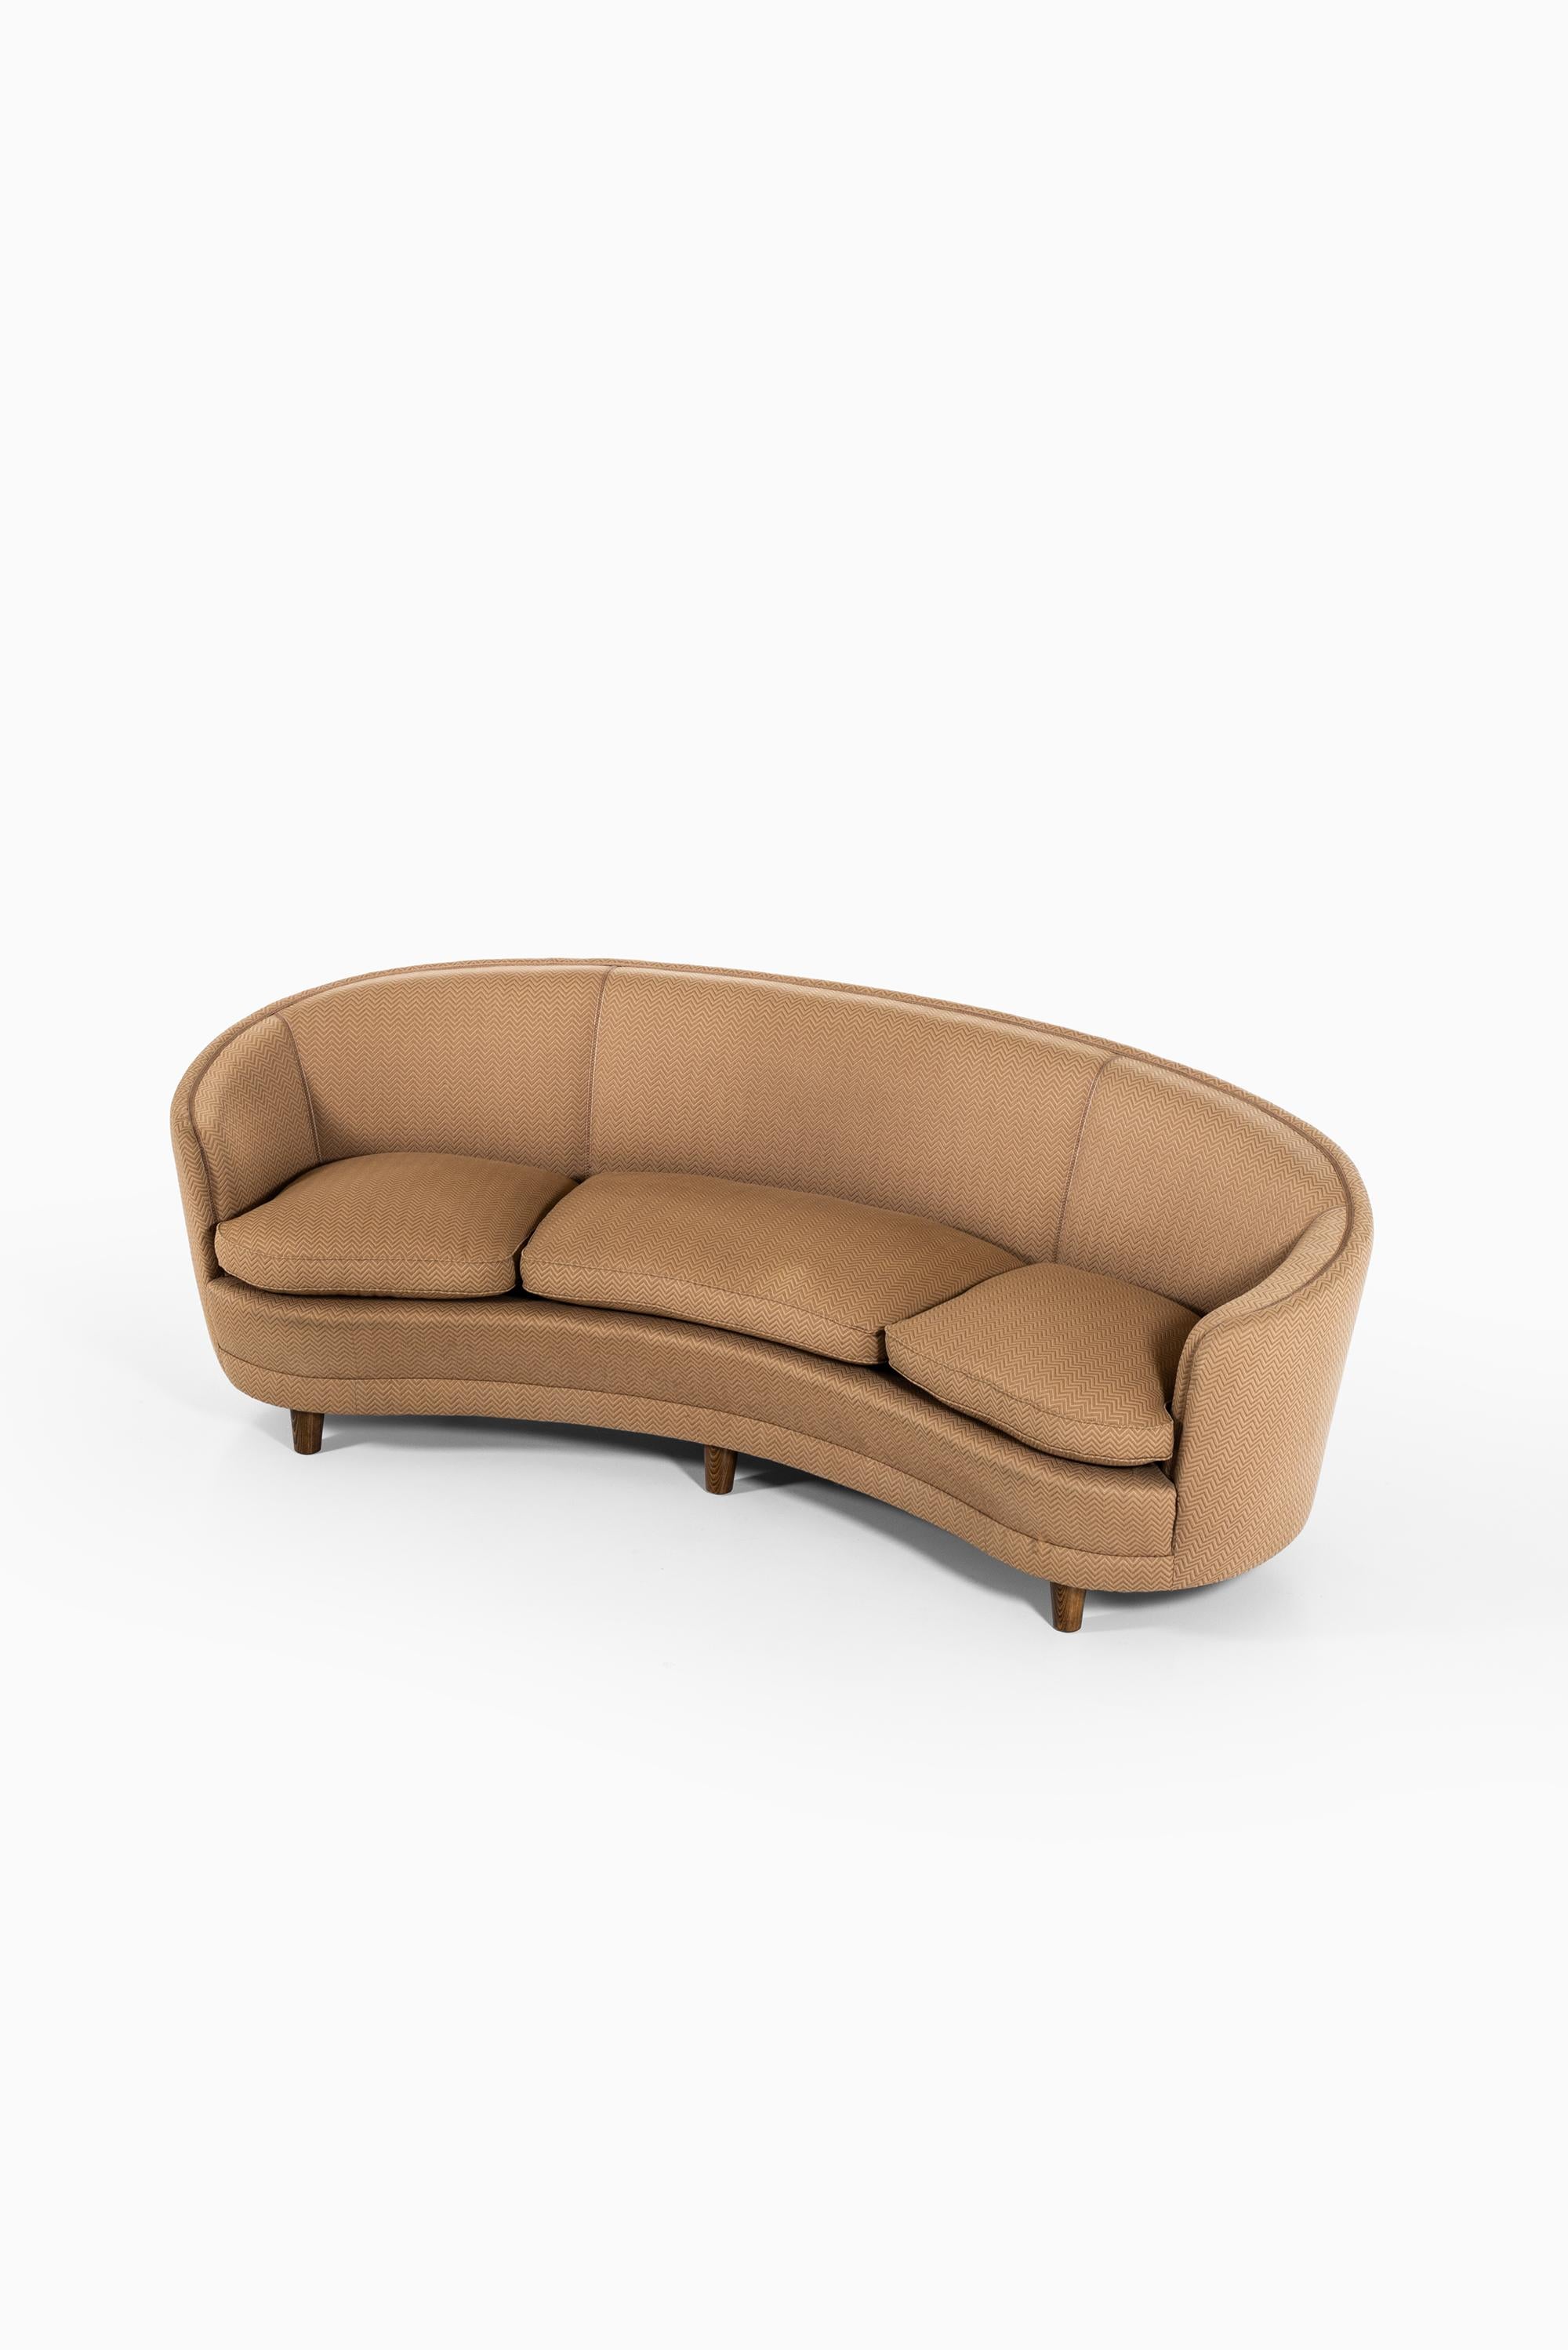 Mid-20th Century Otto Schulz Big Curved Sofa Produced by Boet in Sweden